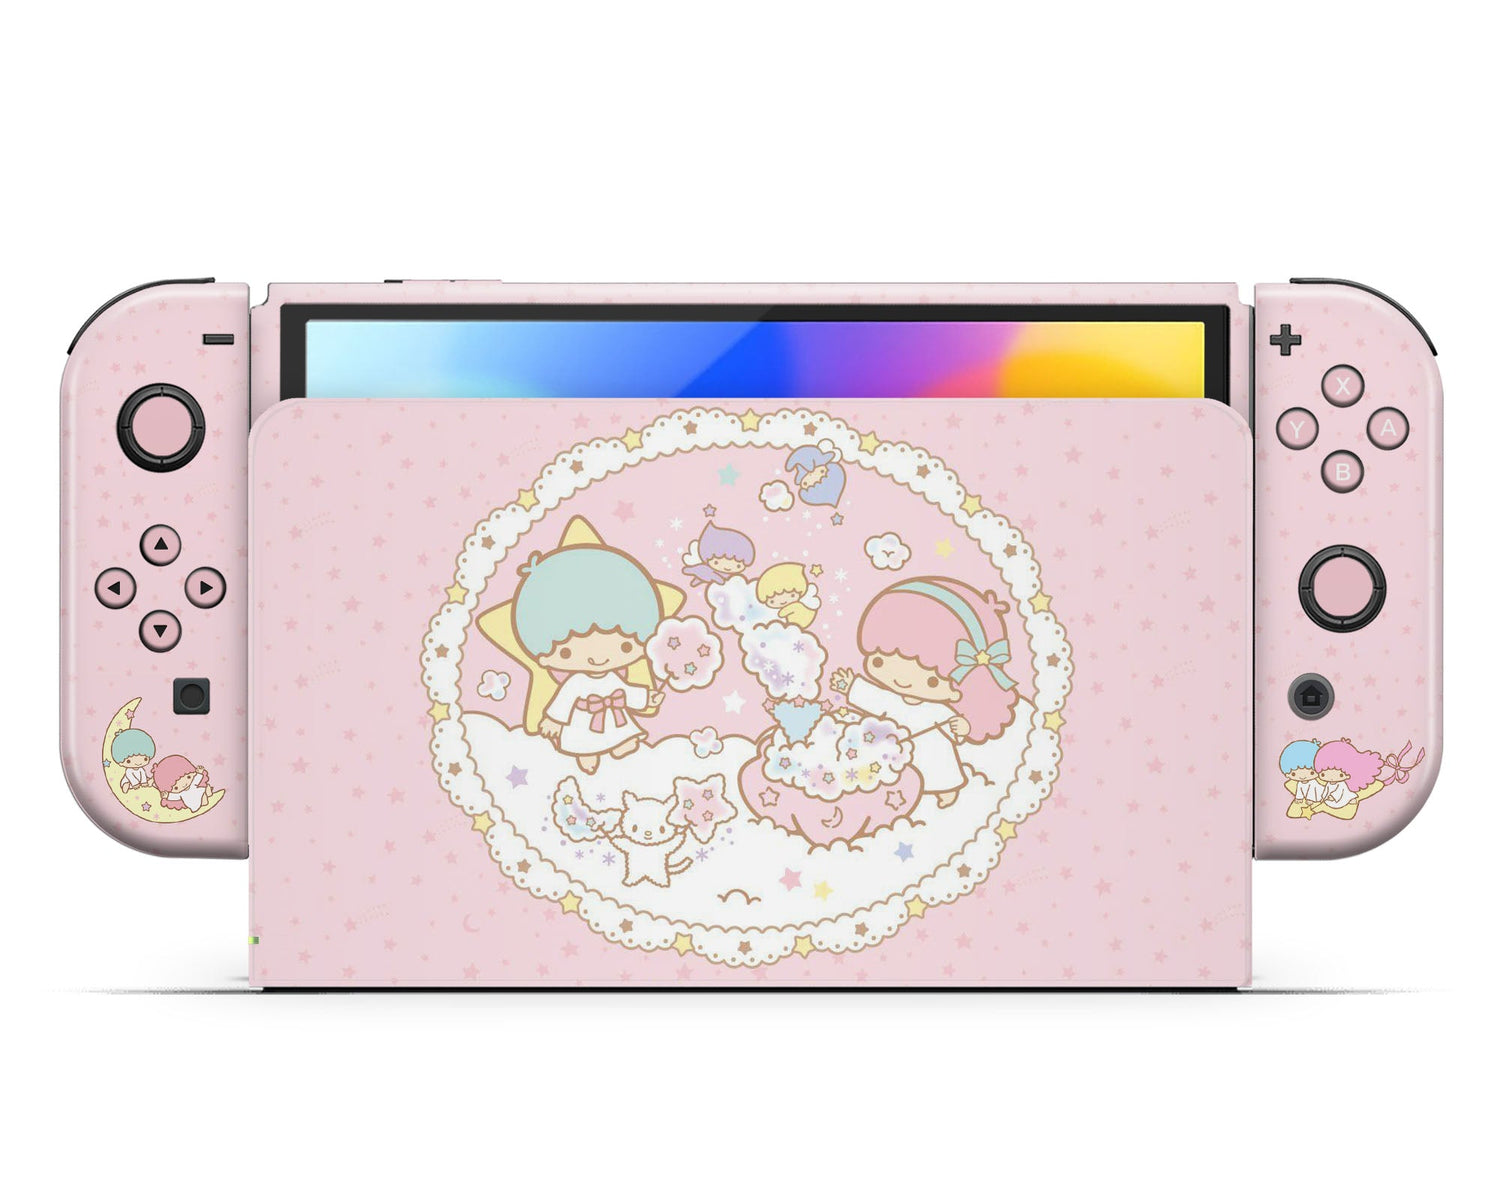 Lux Skins Nintendo Switch OLED Little Twin Star Pink Full Set +Tempered Glass Skins - Pop culture My Little Twin Star Skin